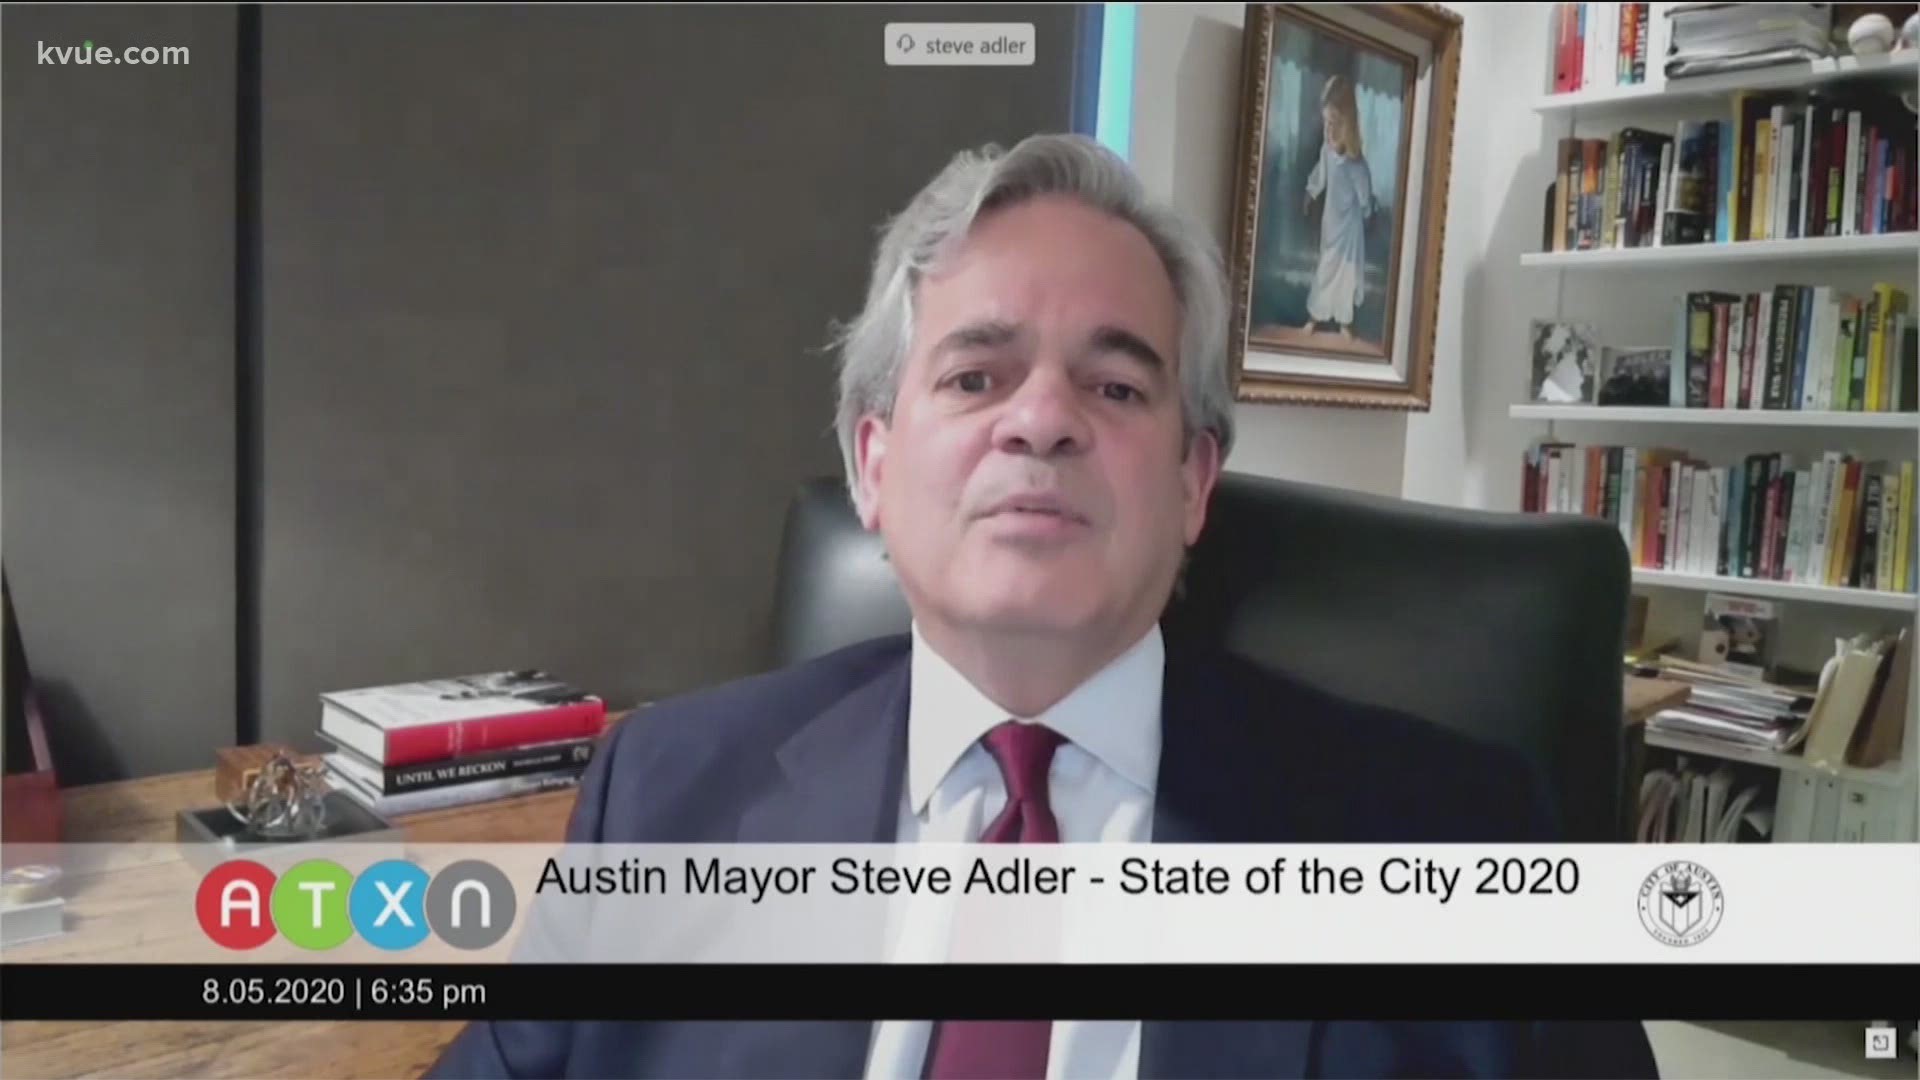 Austin Mayor Steve Adler covered a lot of ground in his State of the City address on Wednesday. He touched on COVID-19, homelessness and race and policing issues.